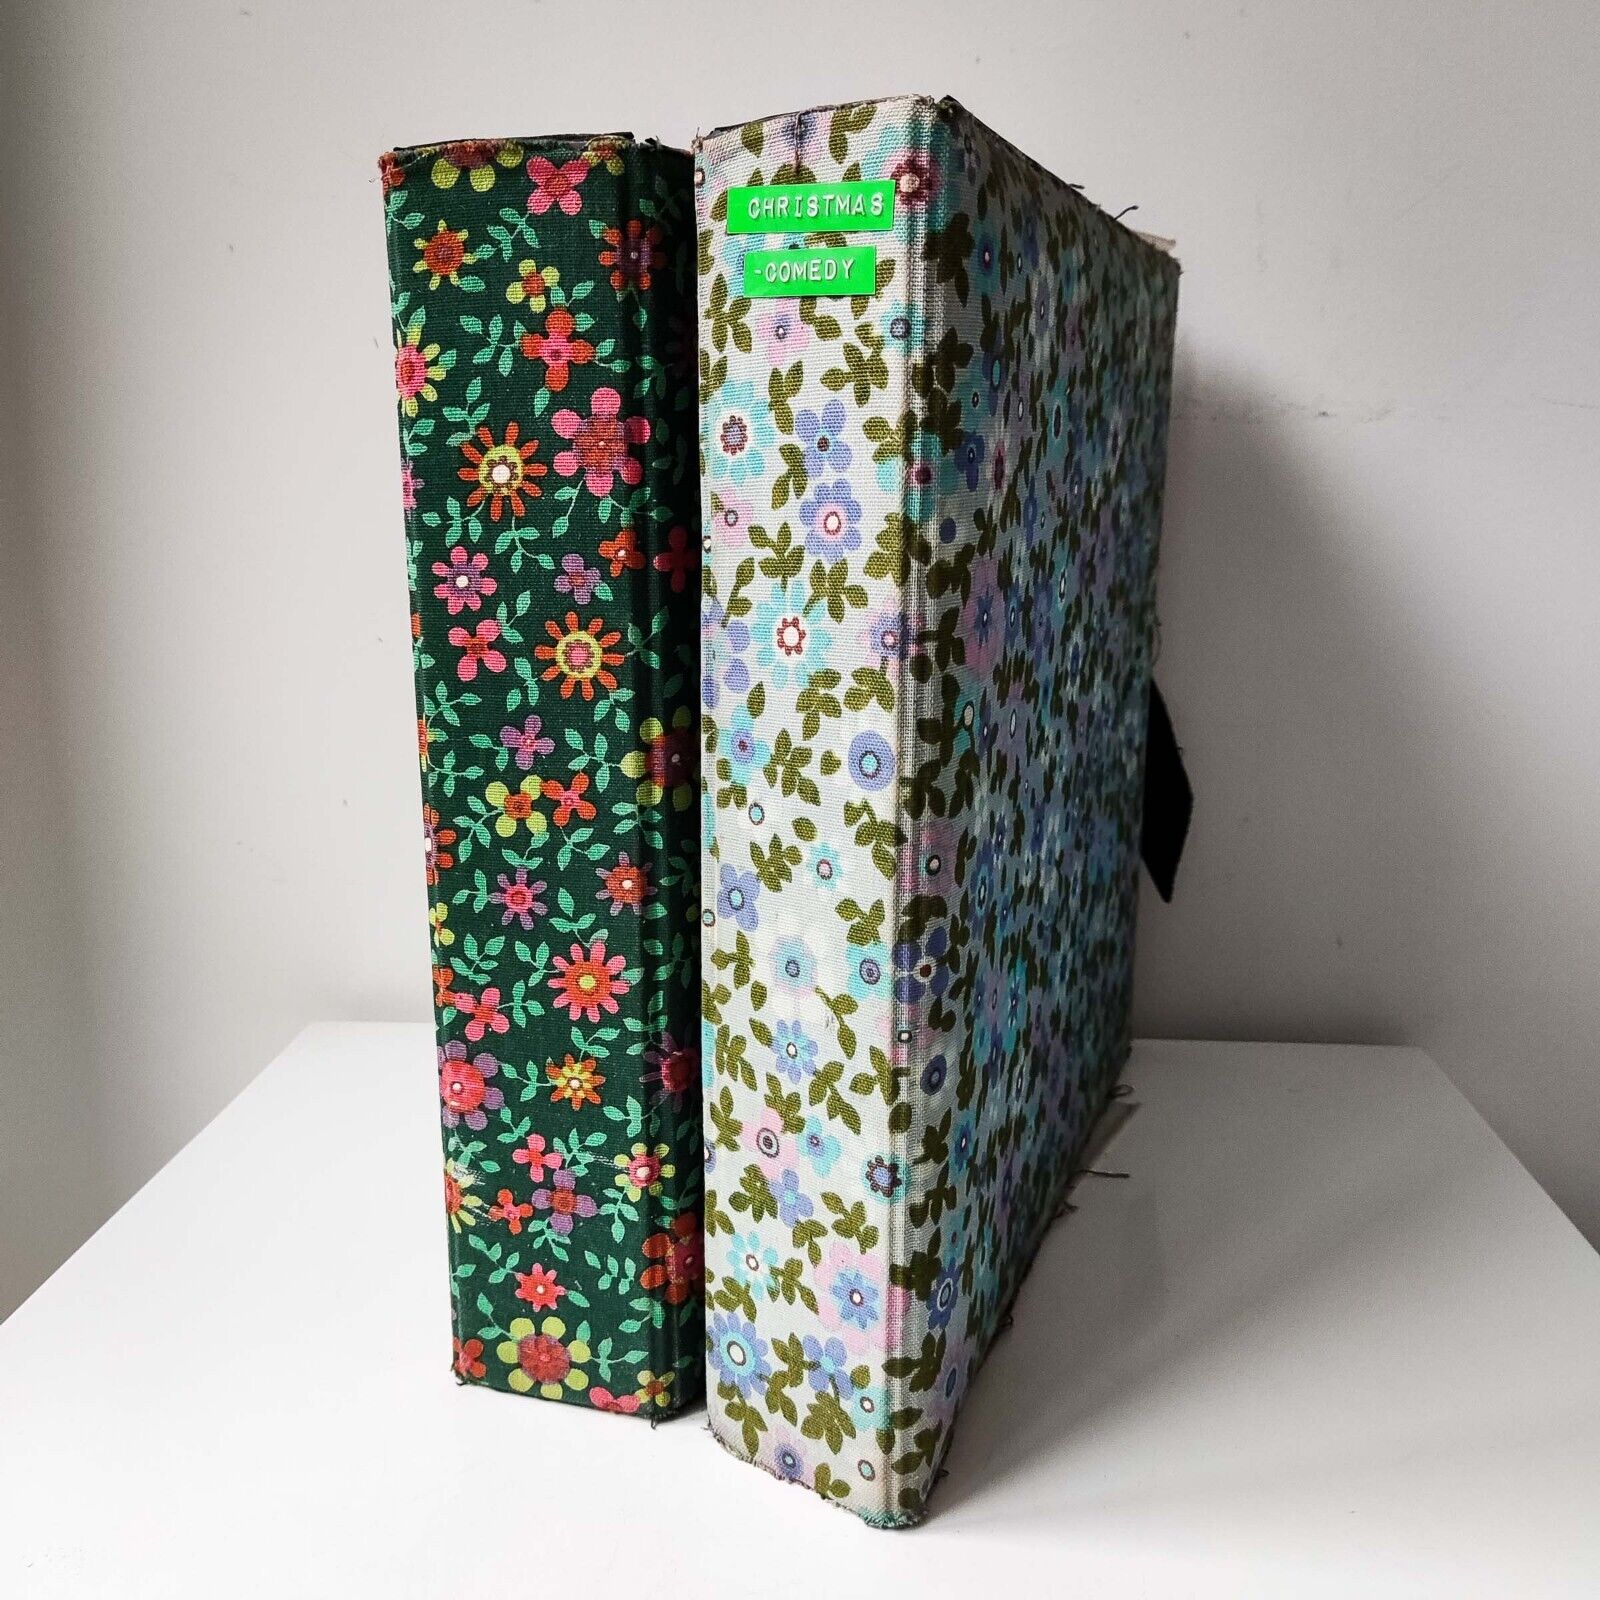 VINTAGE RECORD FOLDER WITH SLEEVES X 2 FLORAL PATTERN